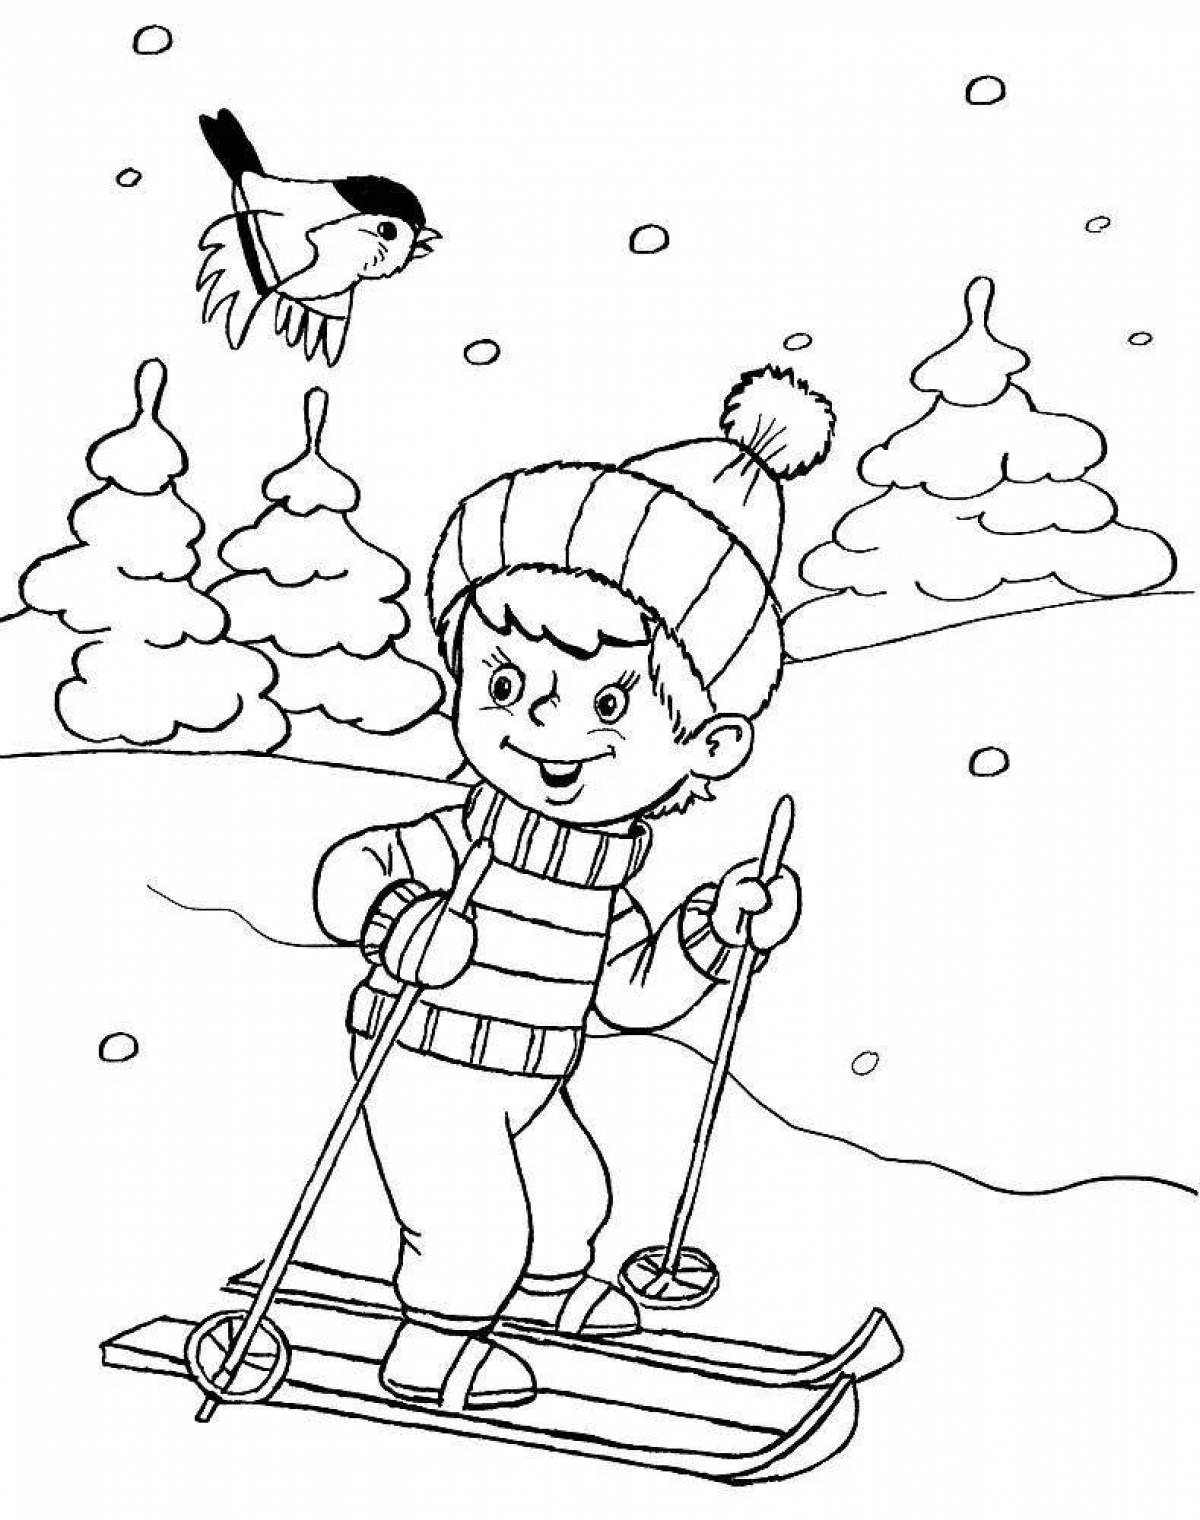 Fancy winter activities coloring page